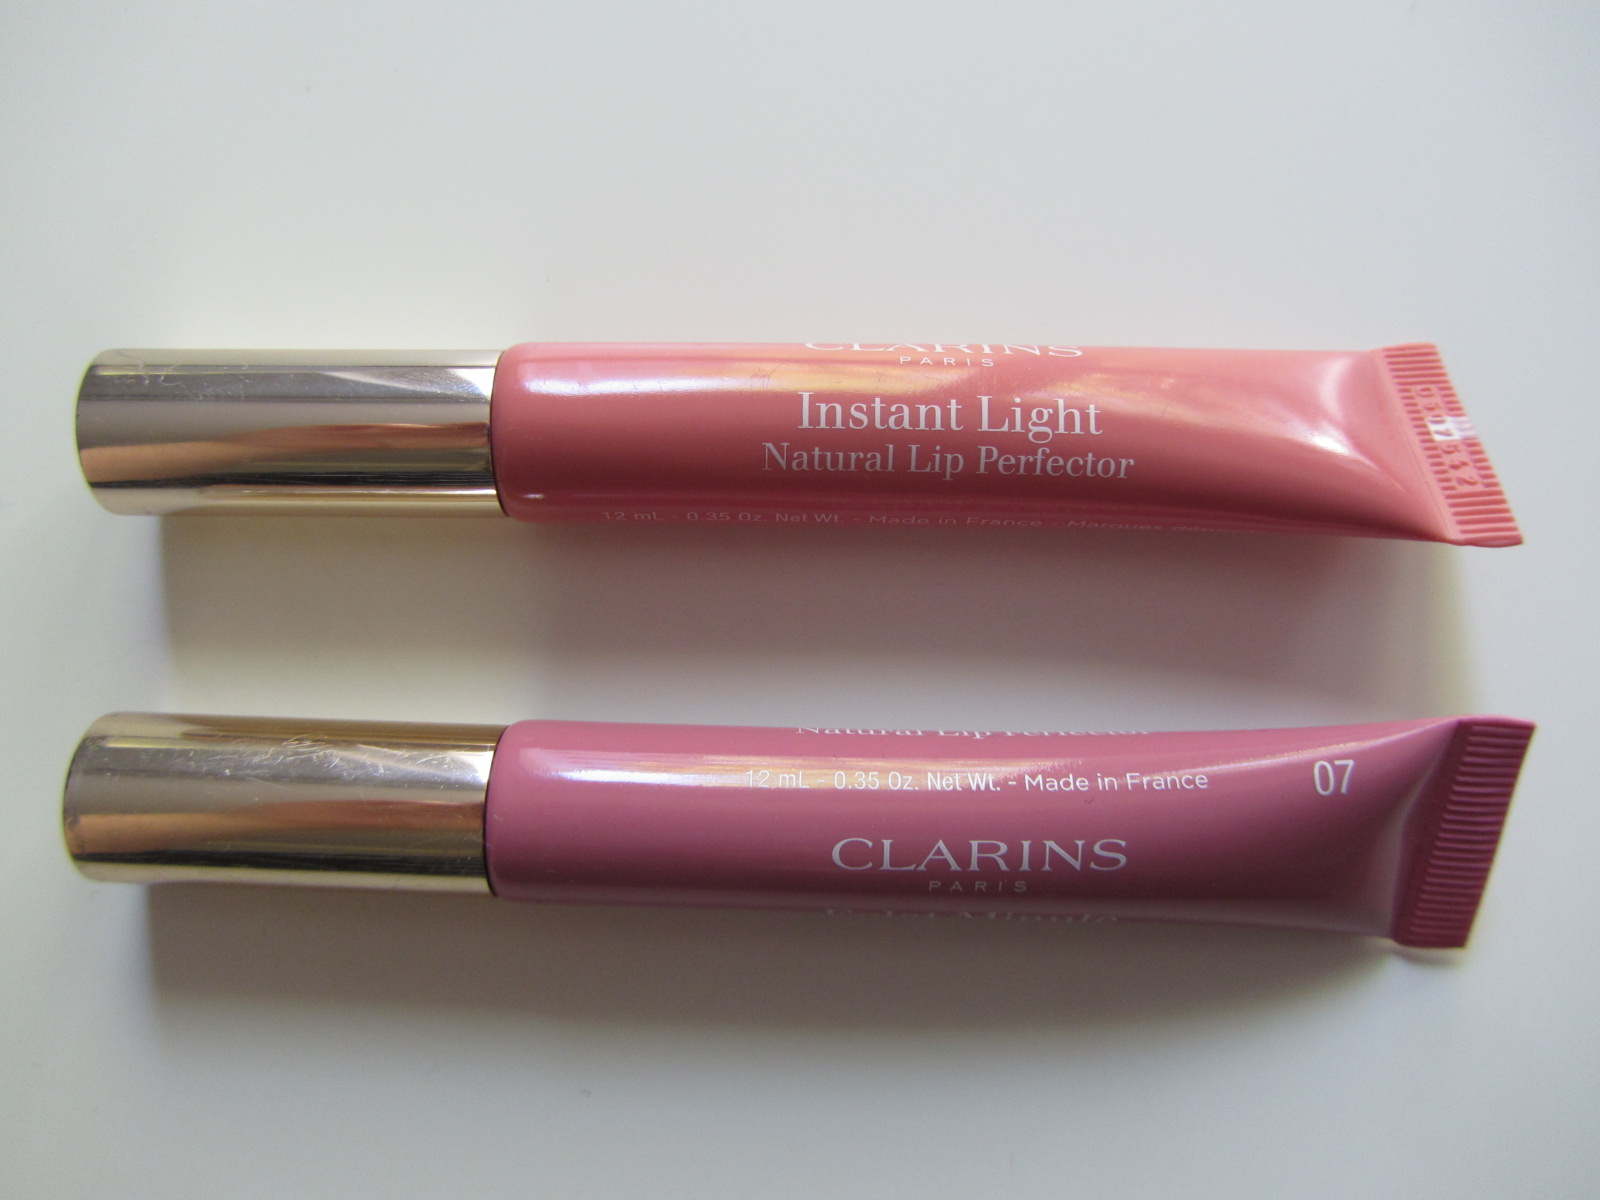 Clarins Instant Light Natural Lip Perfector - wide 5